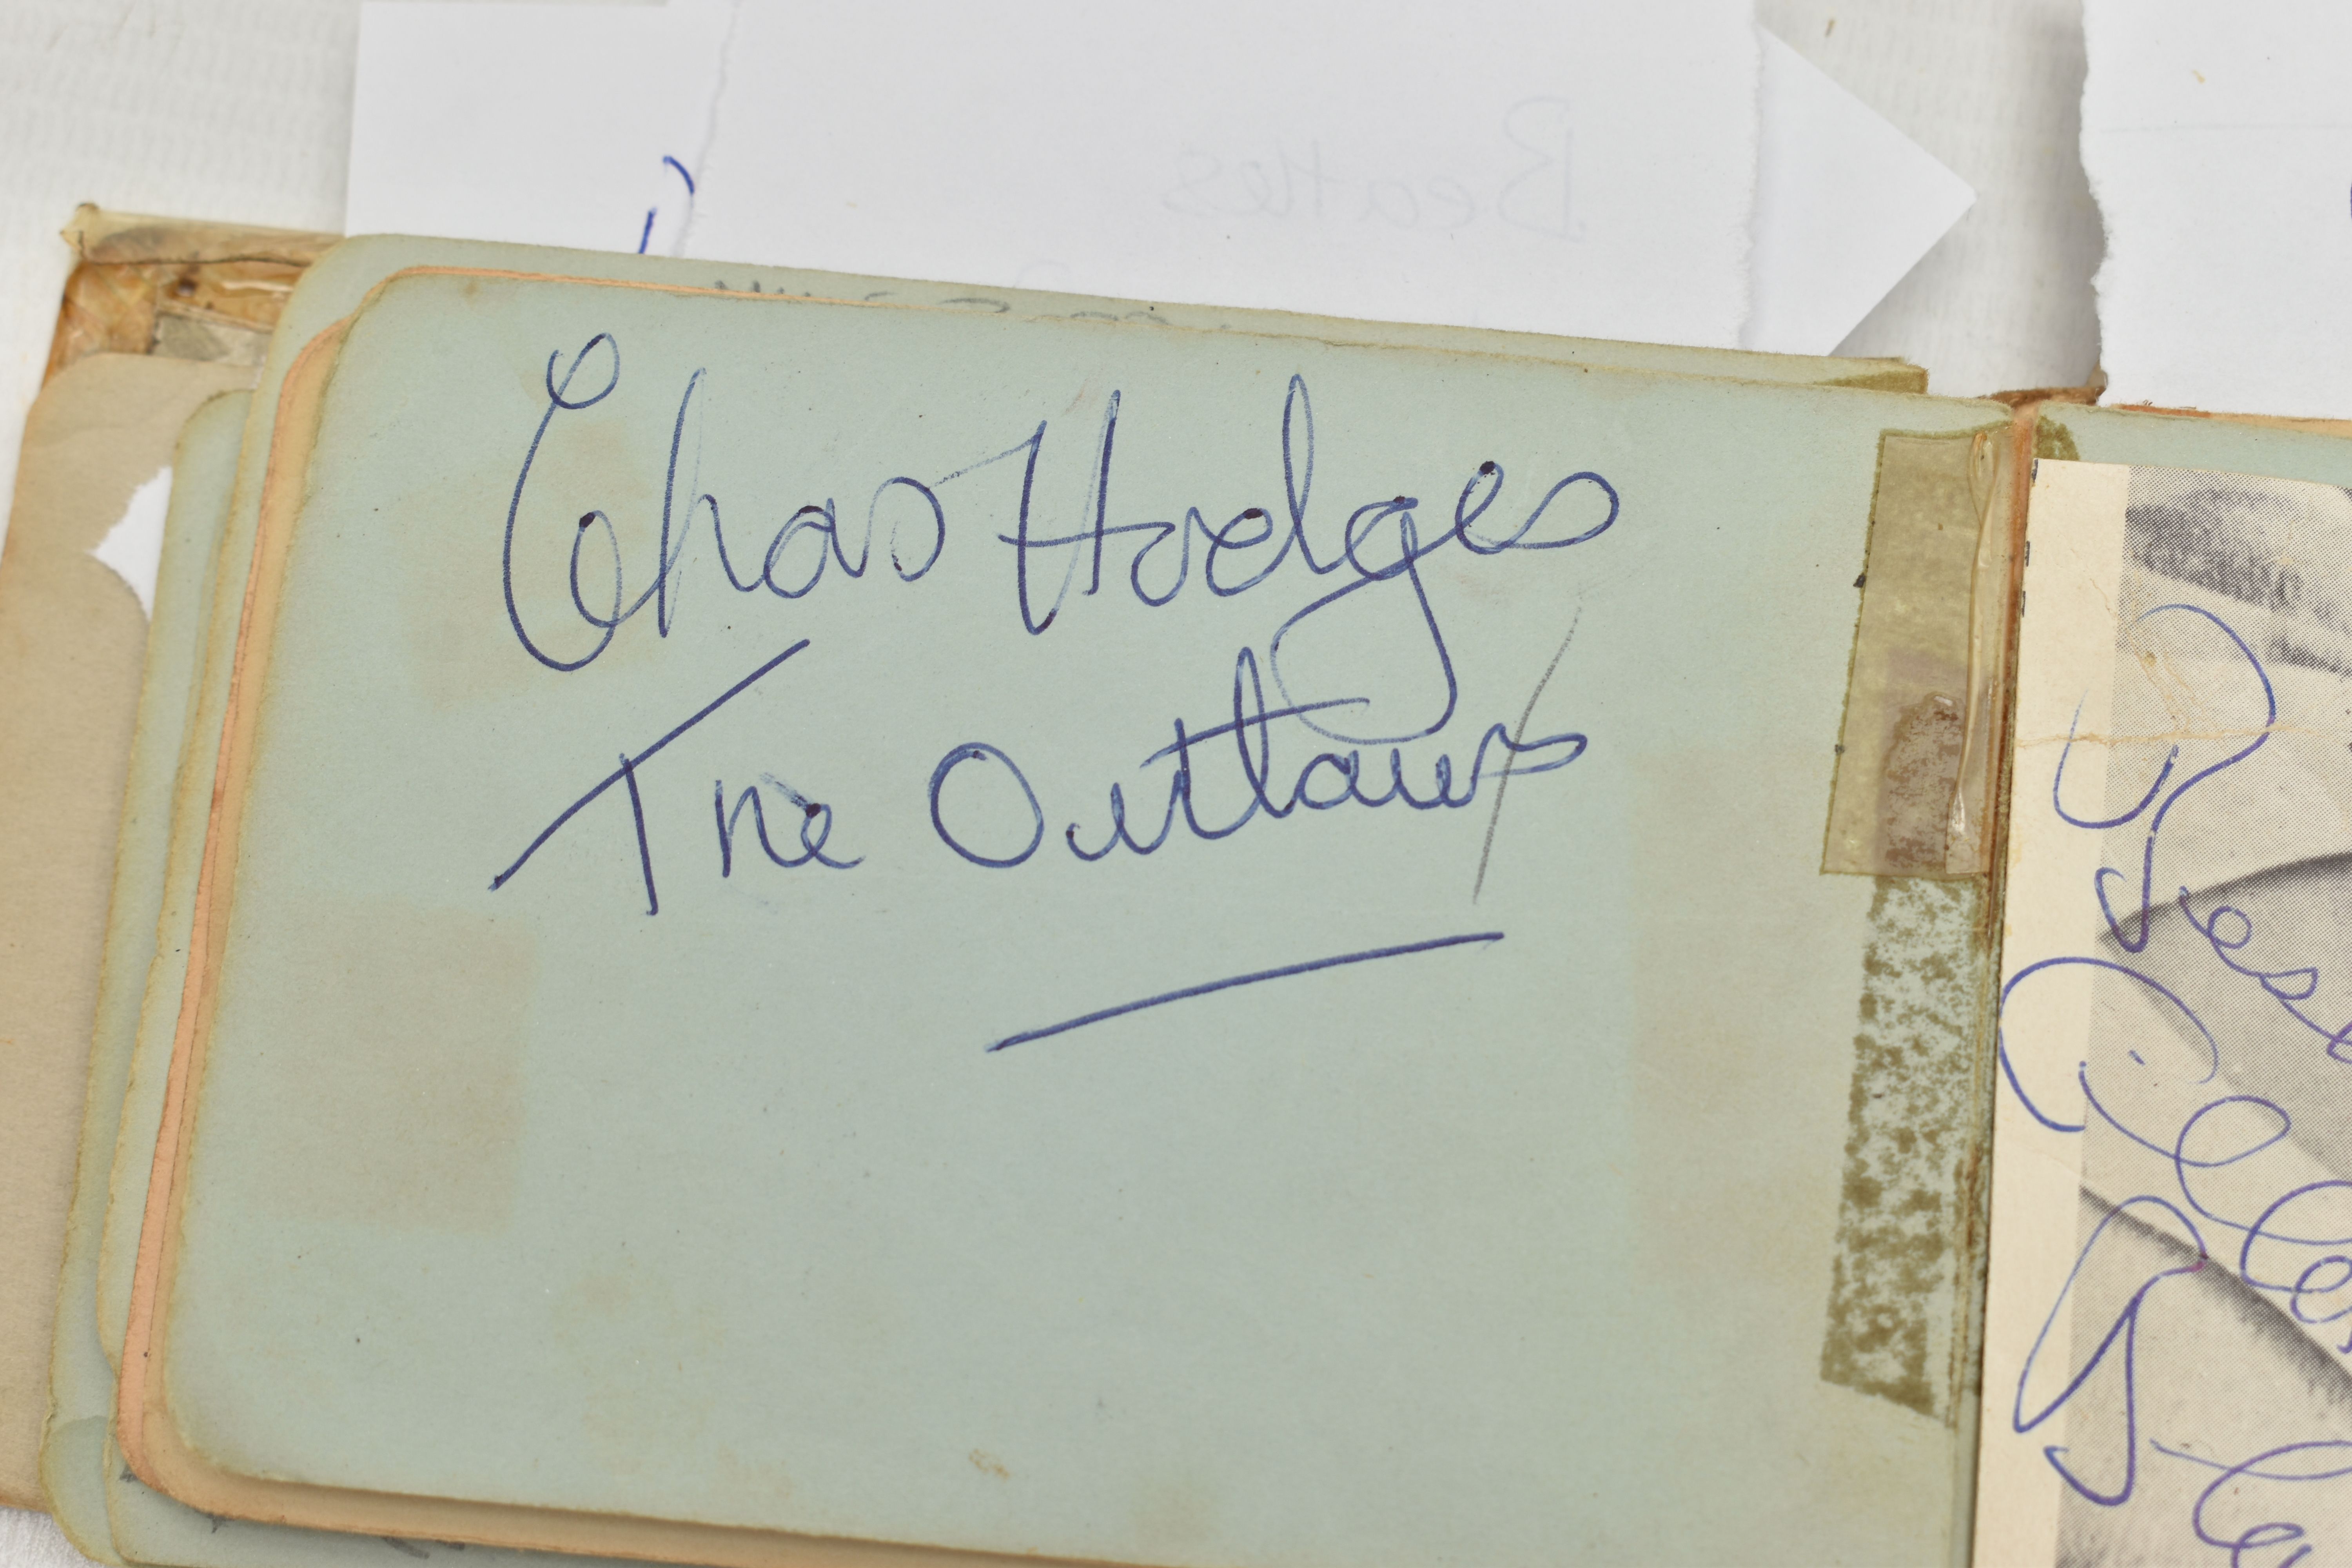 THE BEATLES AUTOGRAPHS, two autograph albums and two photographs, the Woburn Abbey autograph book is - Image 18 of 22